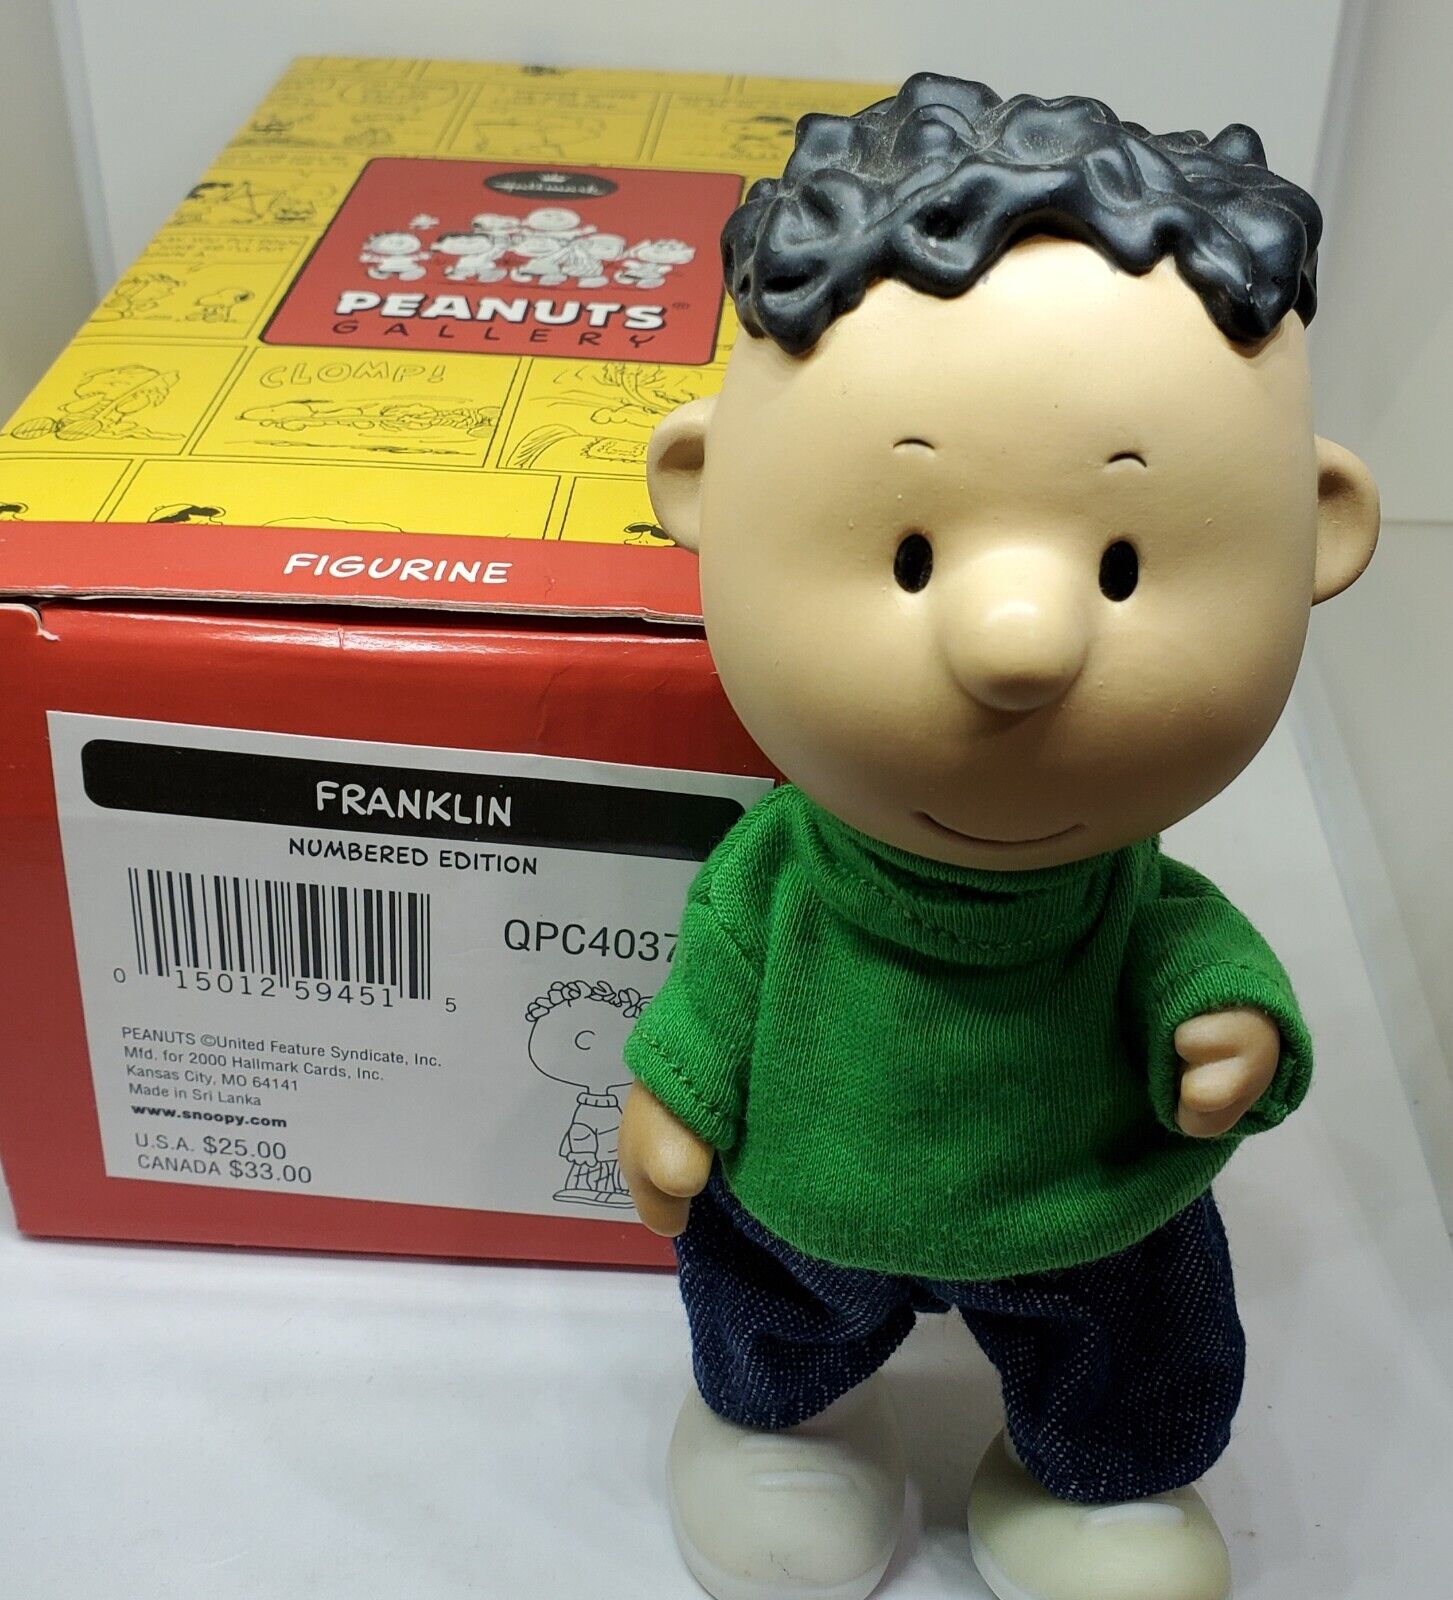 Hallmark Peanuts Gallery *6 inch Porcelain Jointed Franklin Figurine Boxed